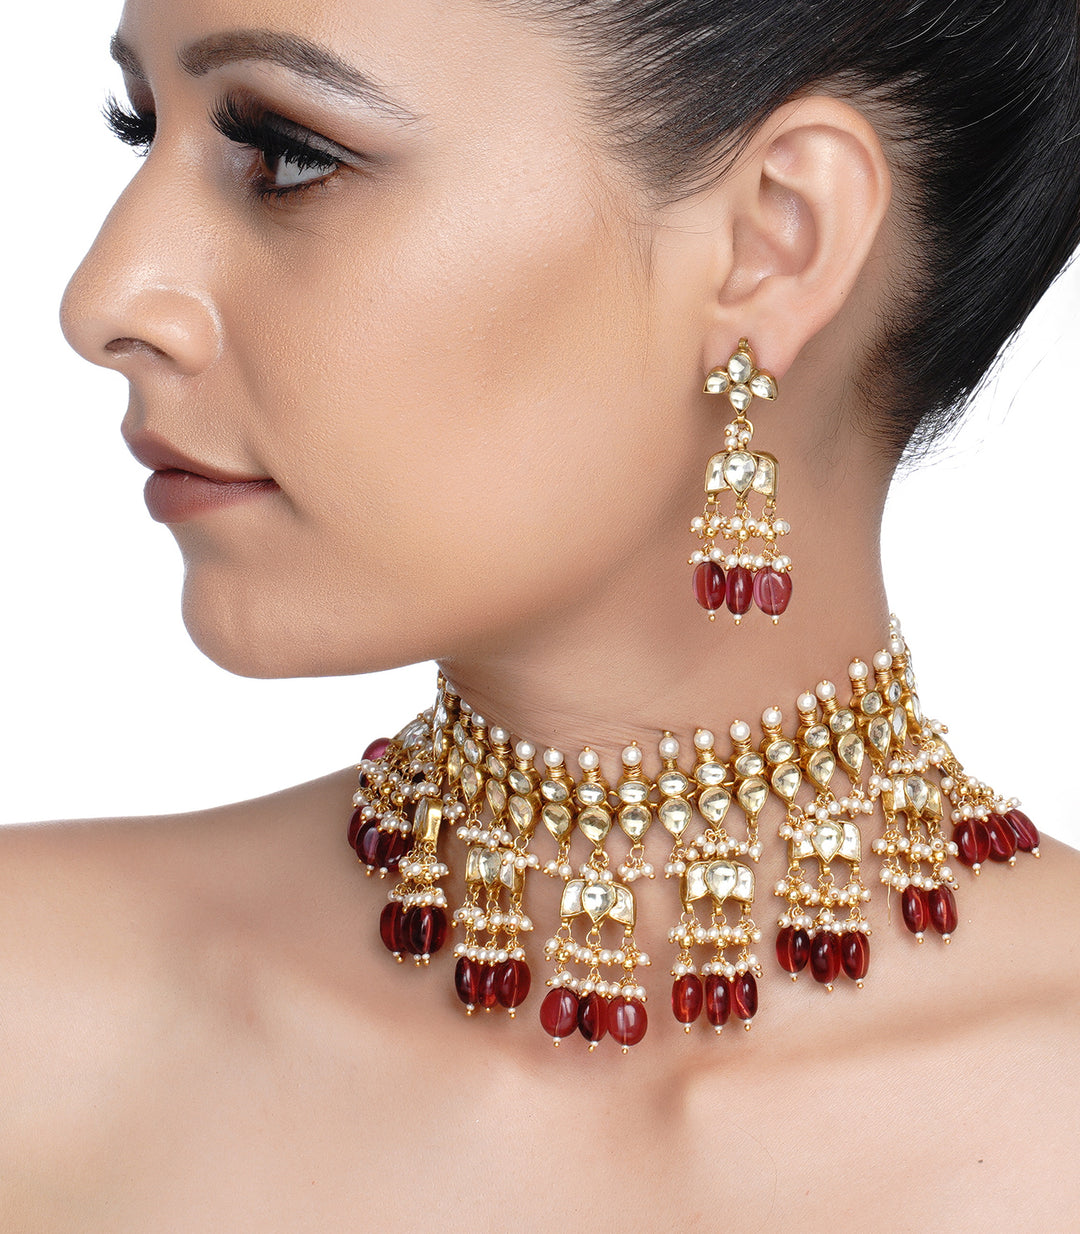 GOLD PLATED PINK KUNDAN CHOKER NECKLACE SET WITH WHITE PEARLS & TOURMALINE DROPS